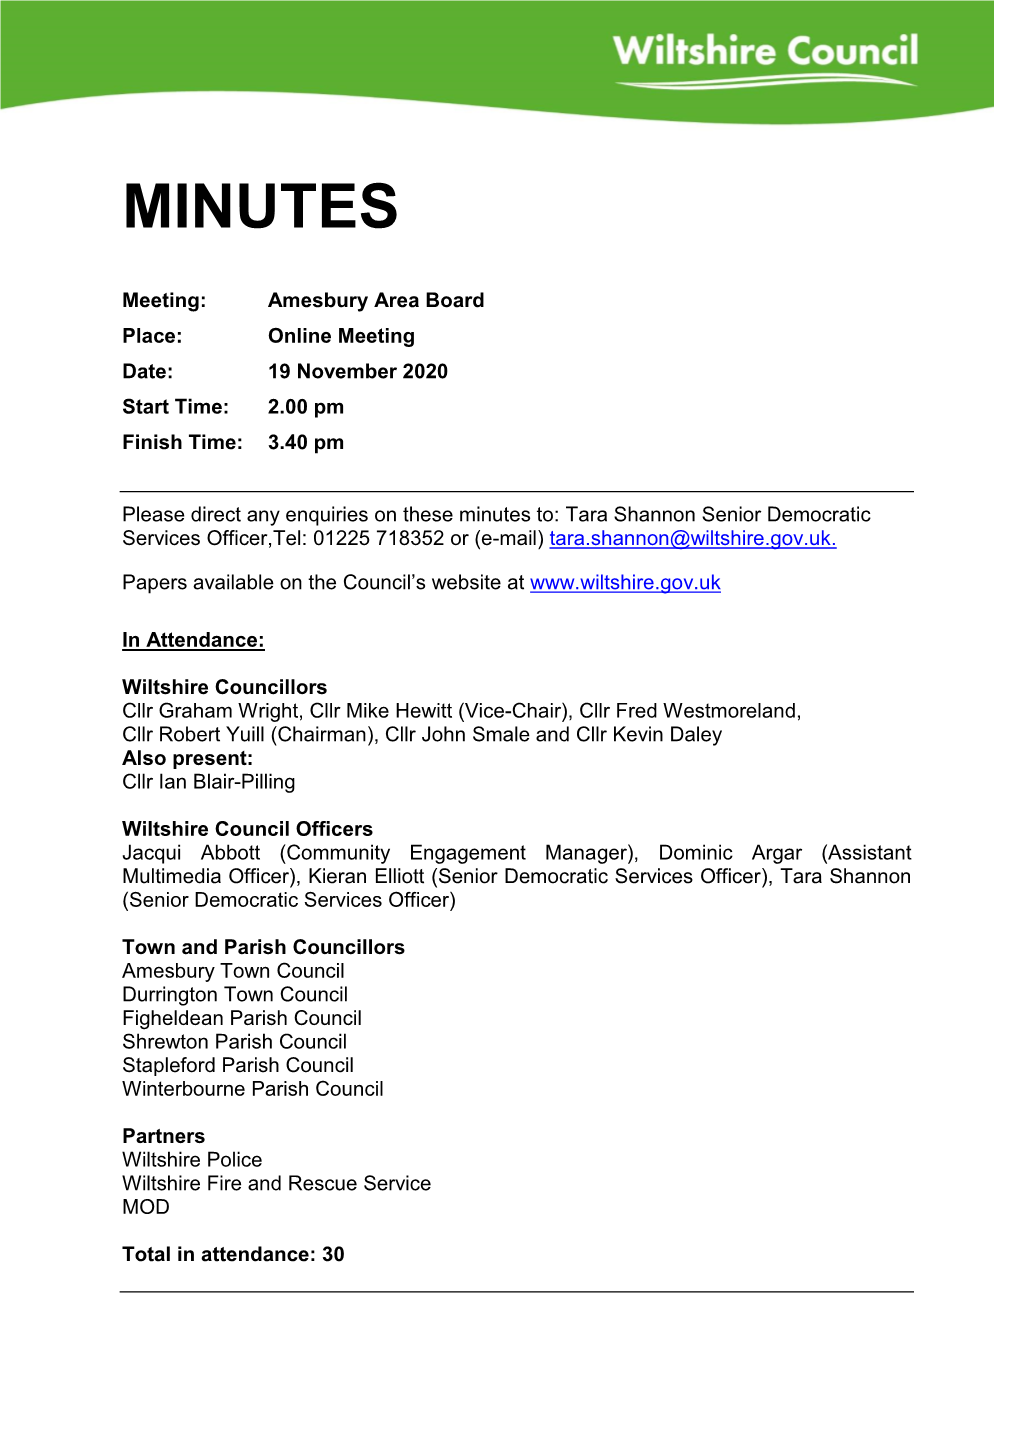 (Public Pack)Minutes Document for Amesbury Area Board, 19/11/2020